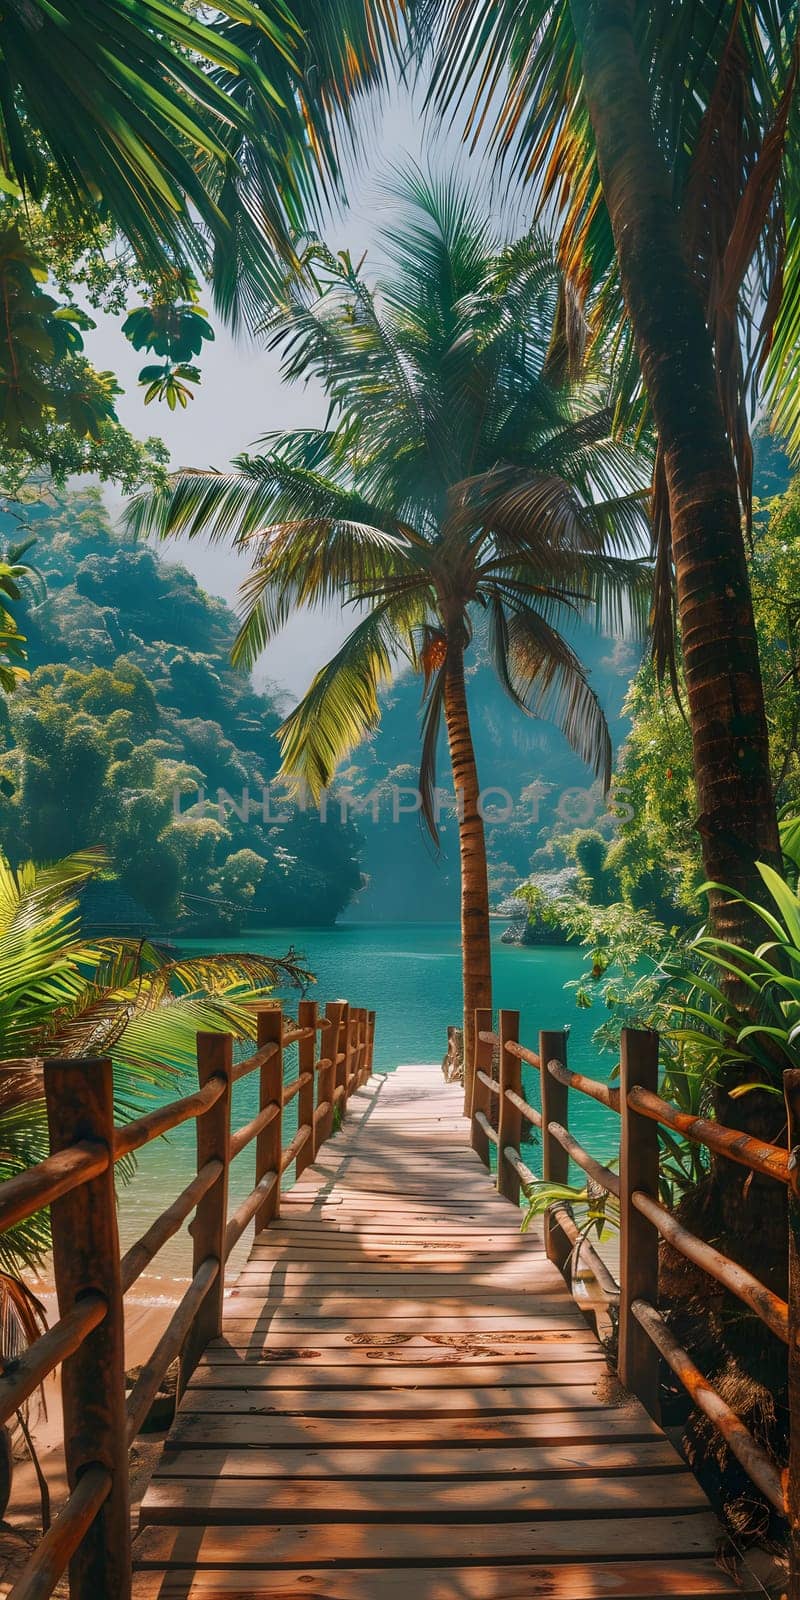 A wooden bridge stretches over the water to a tropical lake, fringed by palm trees and surrounded by a natural landscape of lush greenery